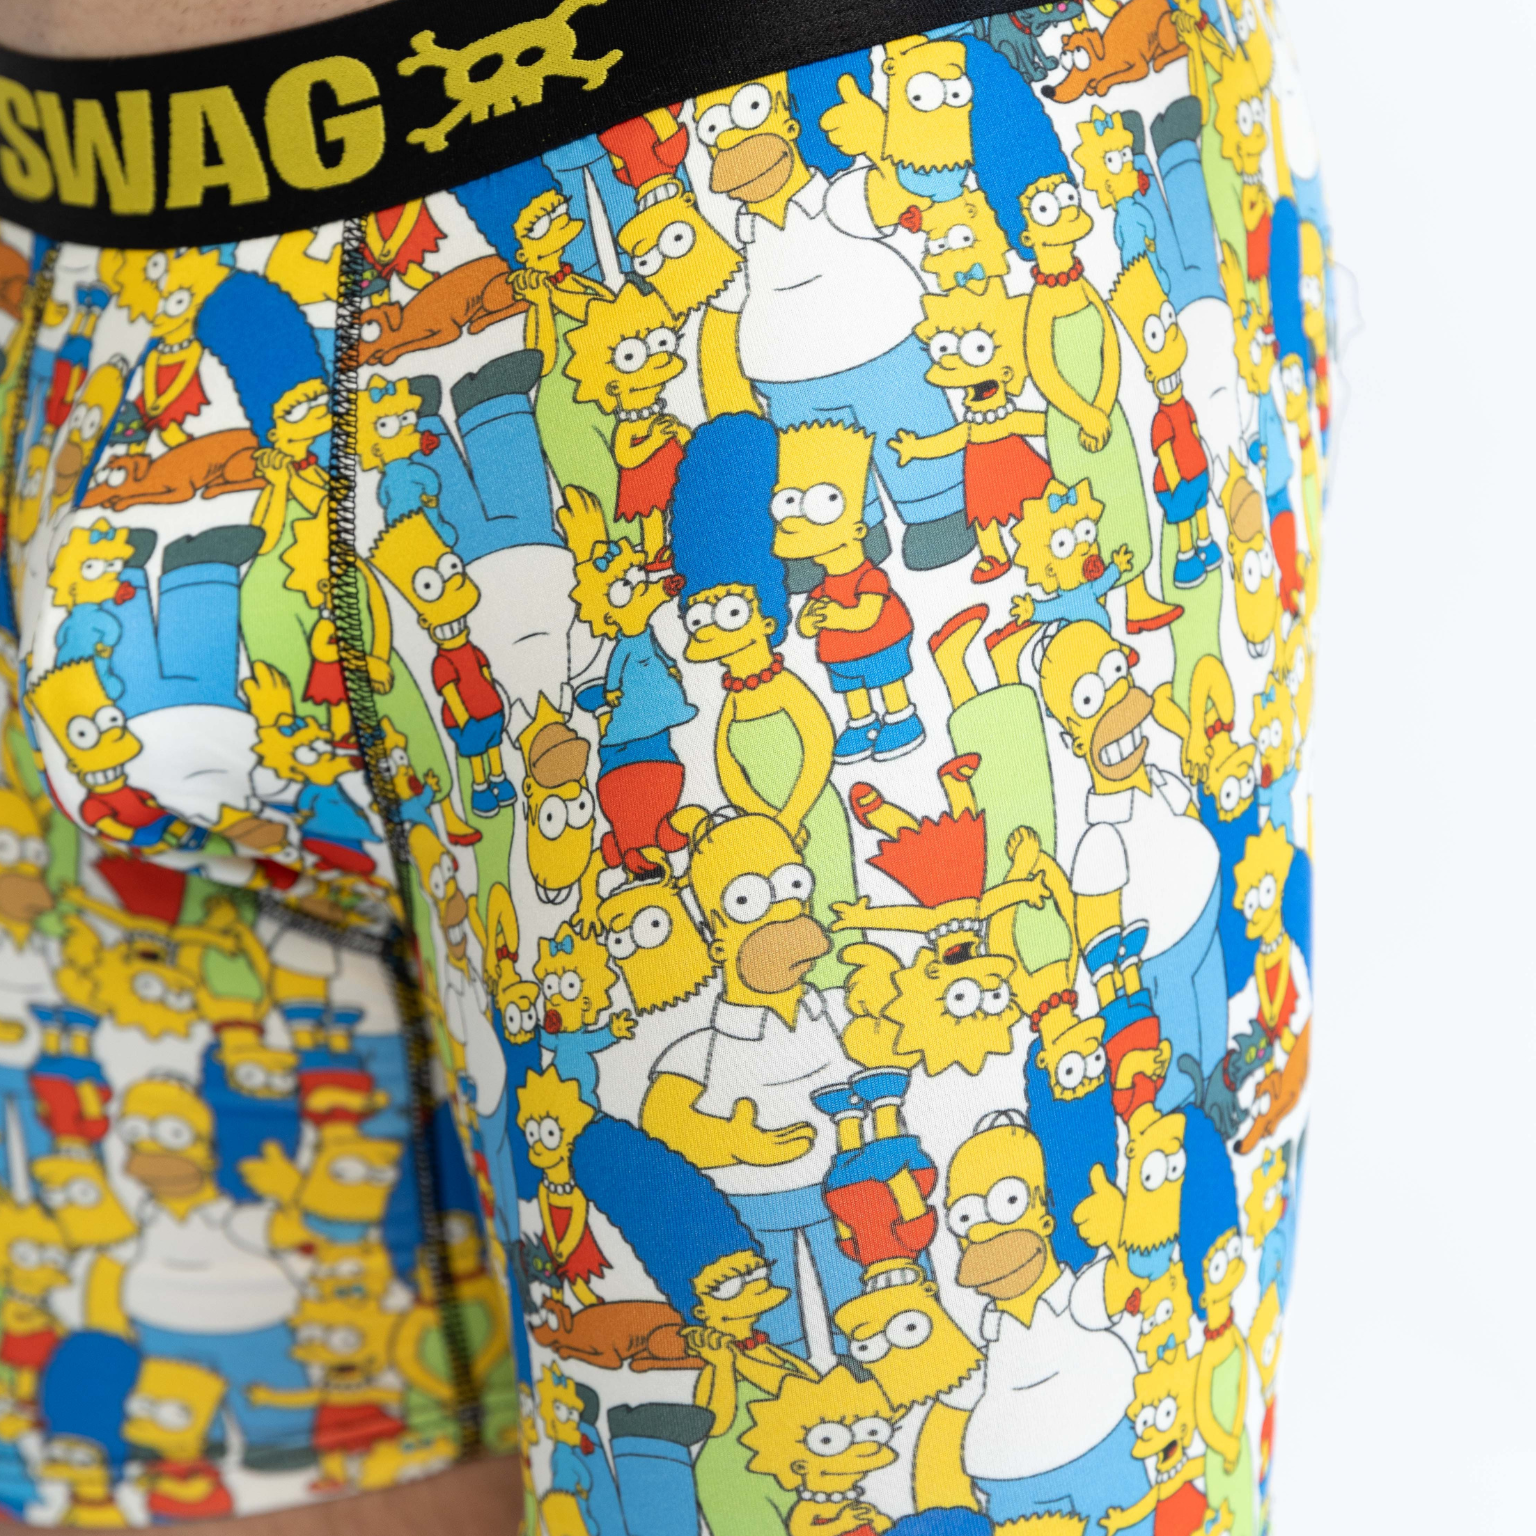 SWAG THE SIMPSONS BOXERS - SIMPSON FAMILY